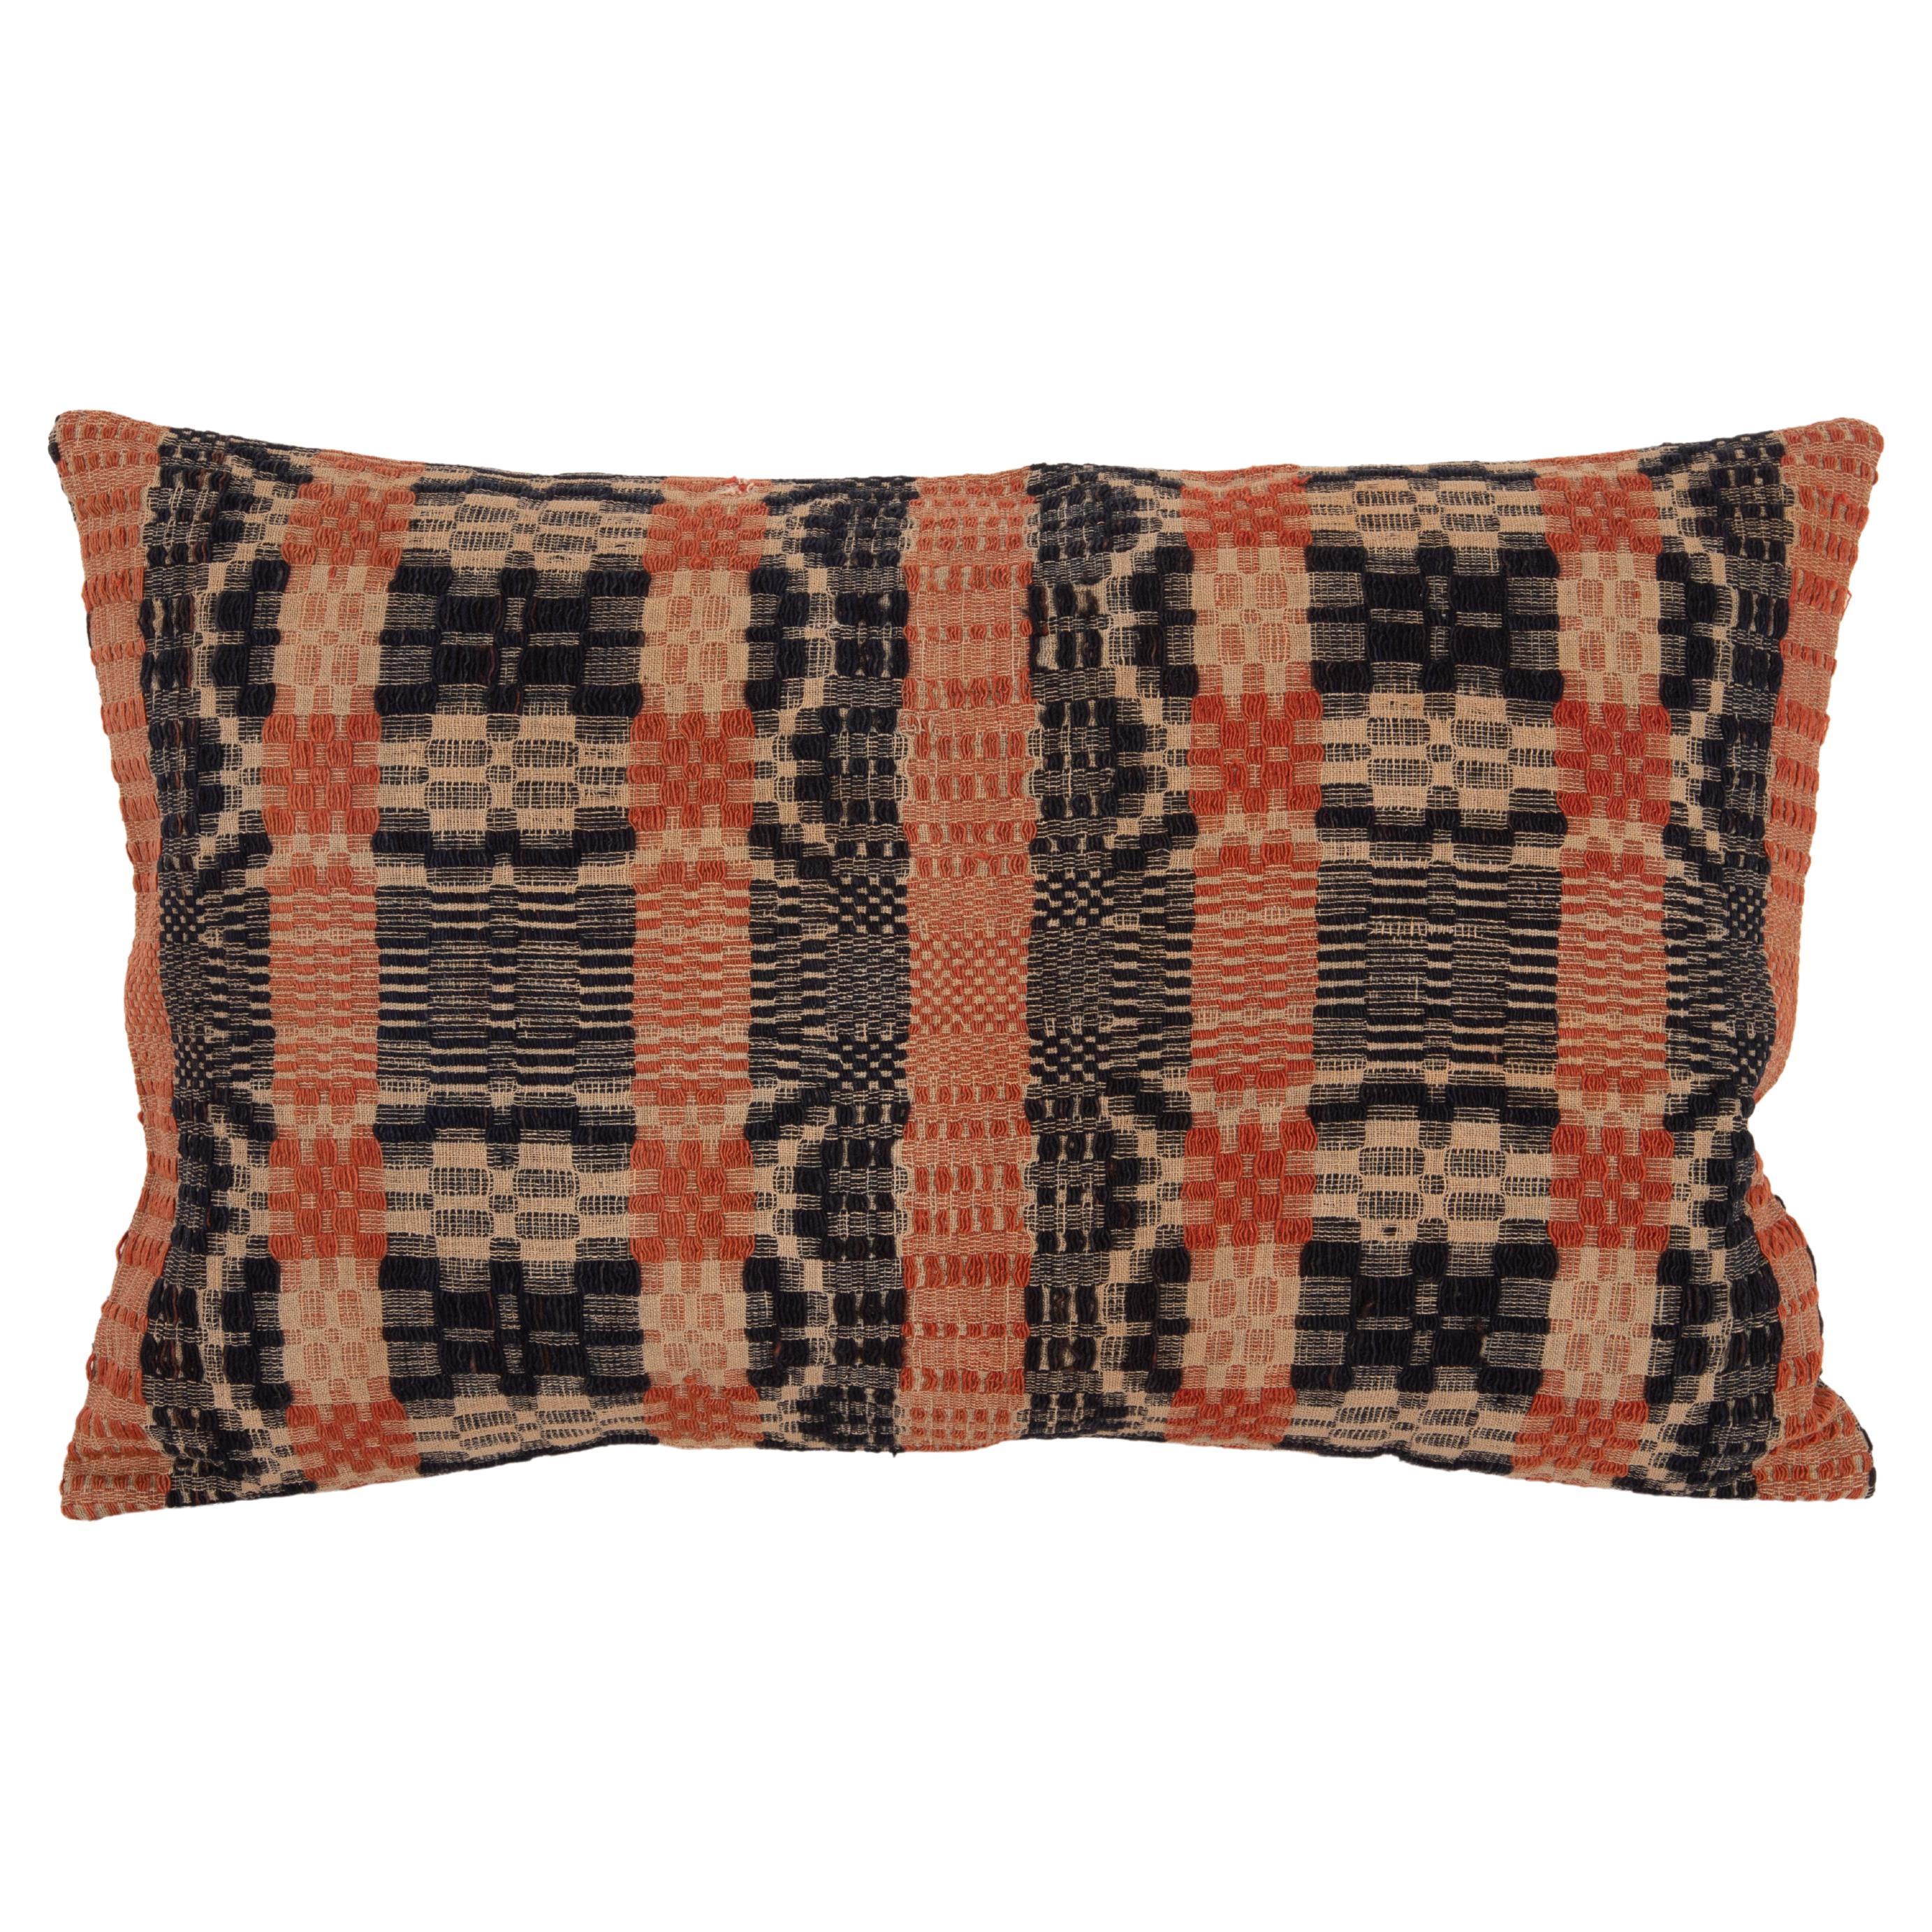 American Coverlet Pillow Cover, North America, 19th C.